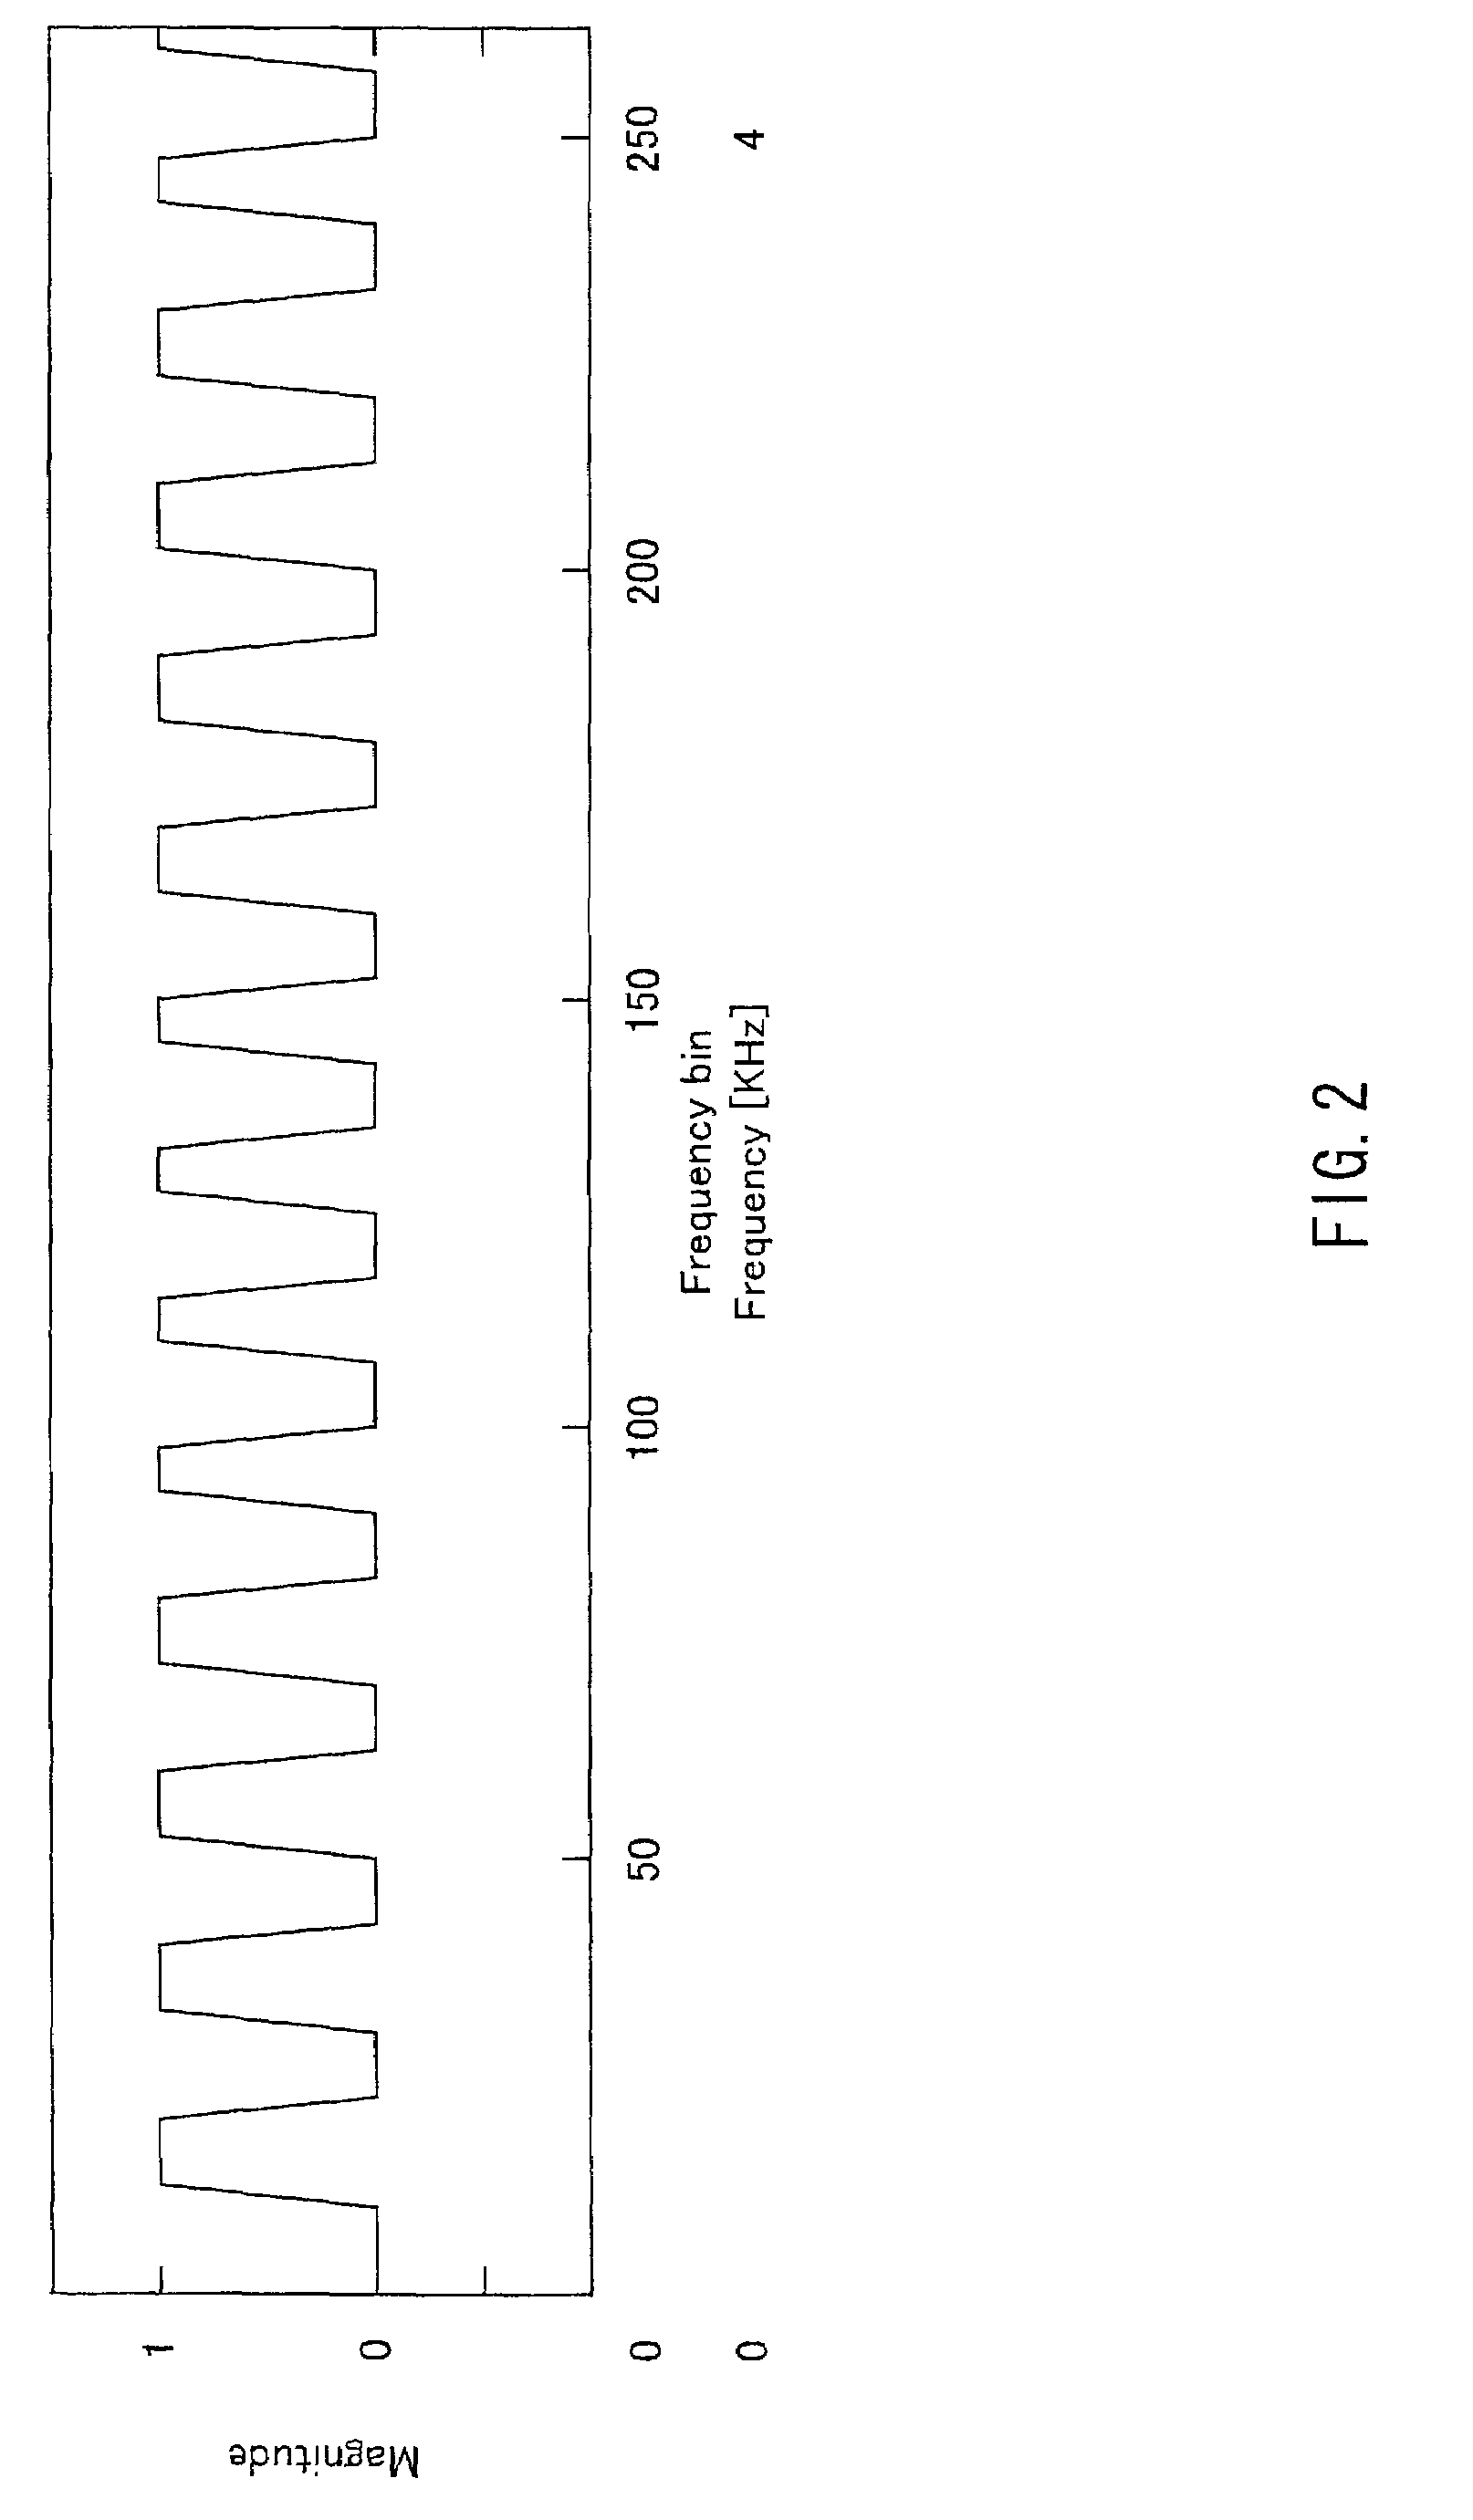 Speech processing apparatus and method for enhancing speech information and suppressing noise in spectral divisions of a speech signal